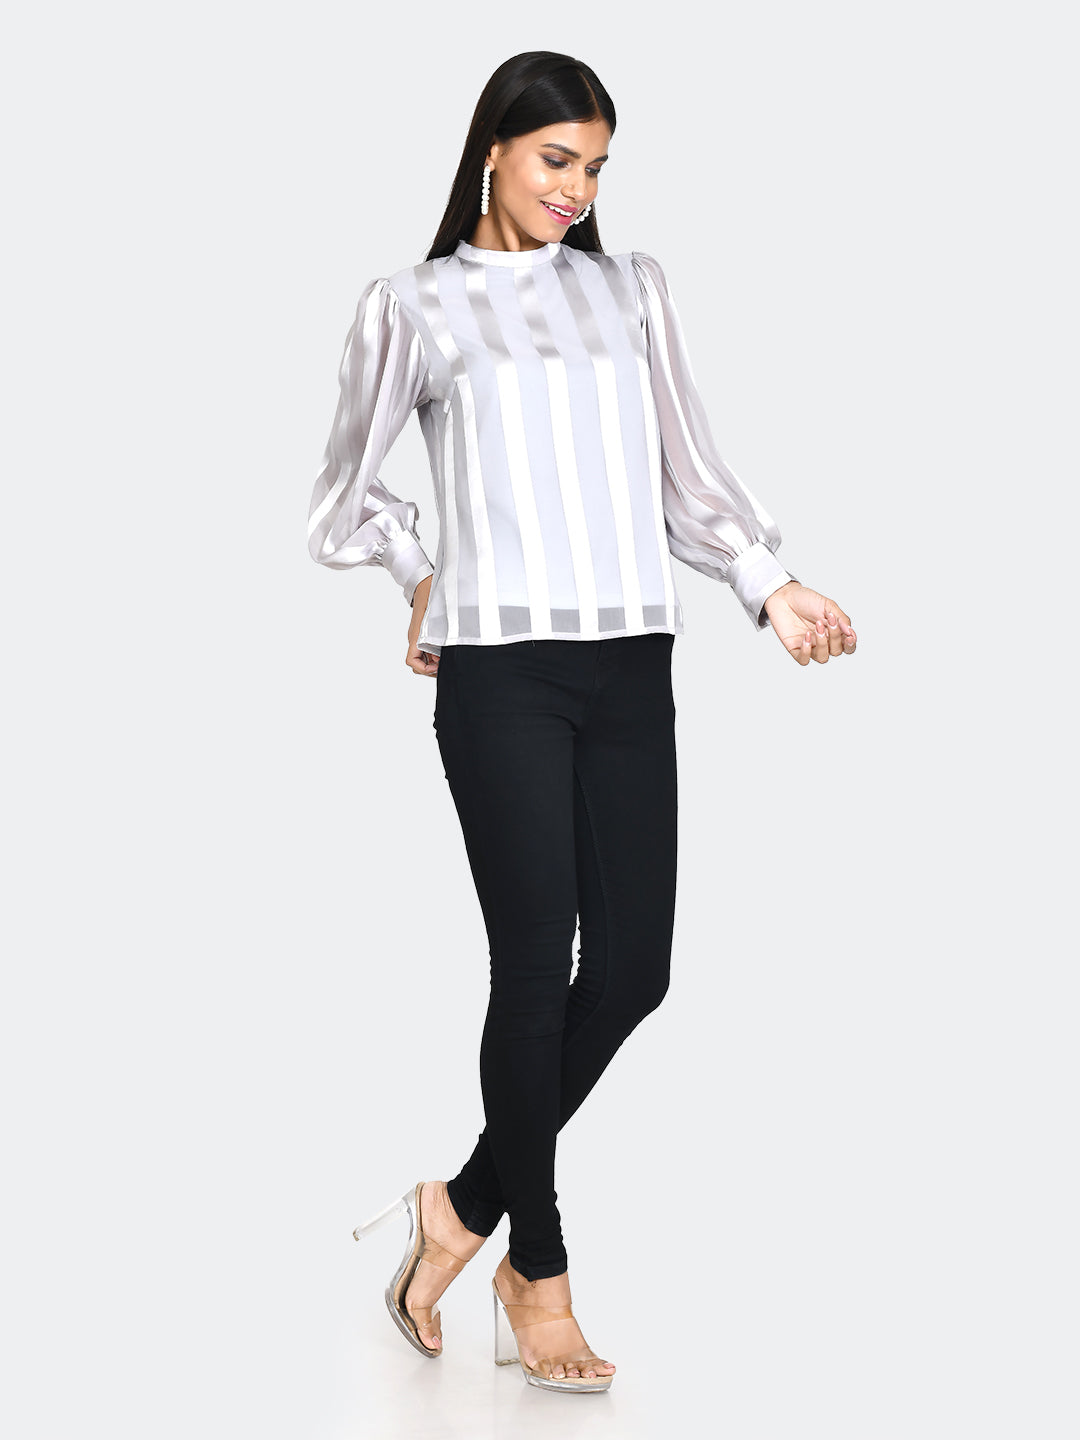 Grey Striped Top For Women